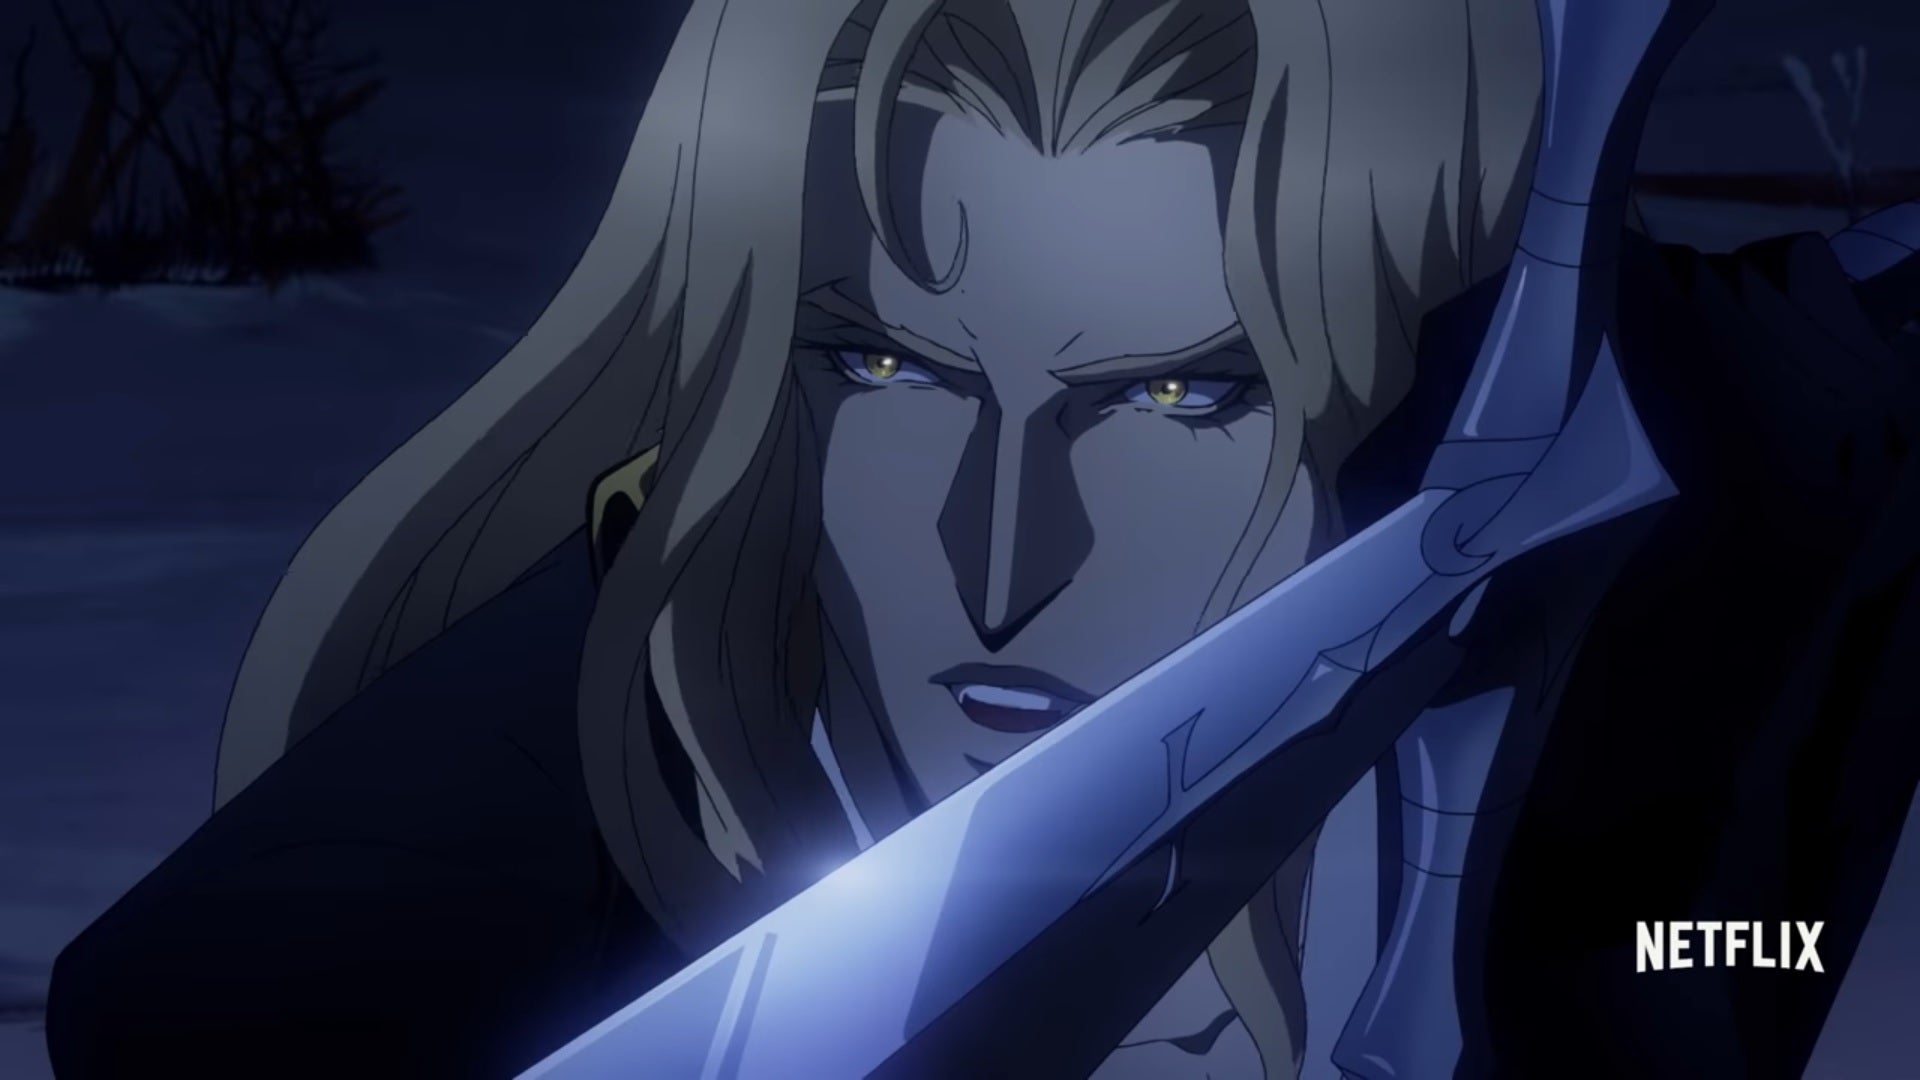 Castlevania season 2 trailer shows off bloody monsterfighting action   VG247